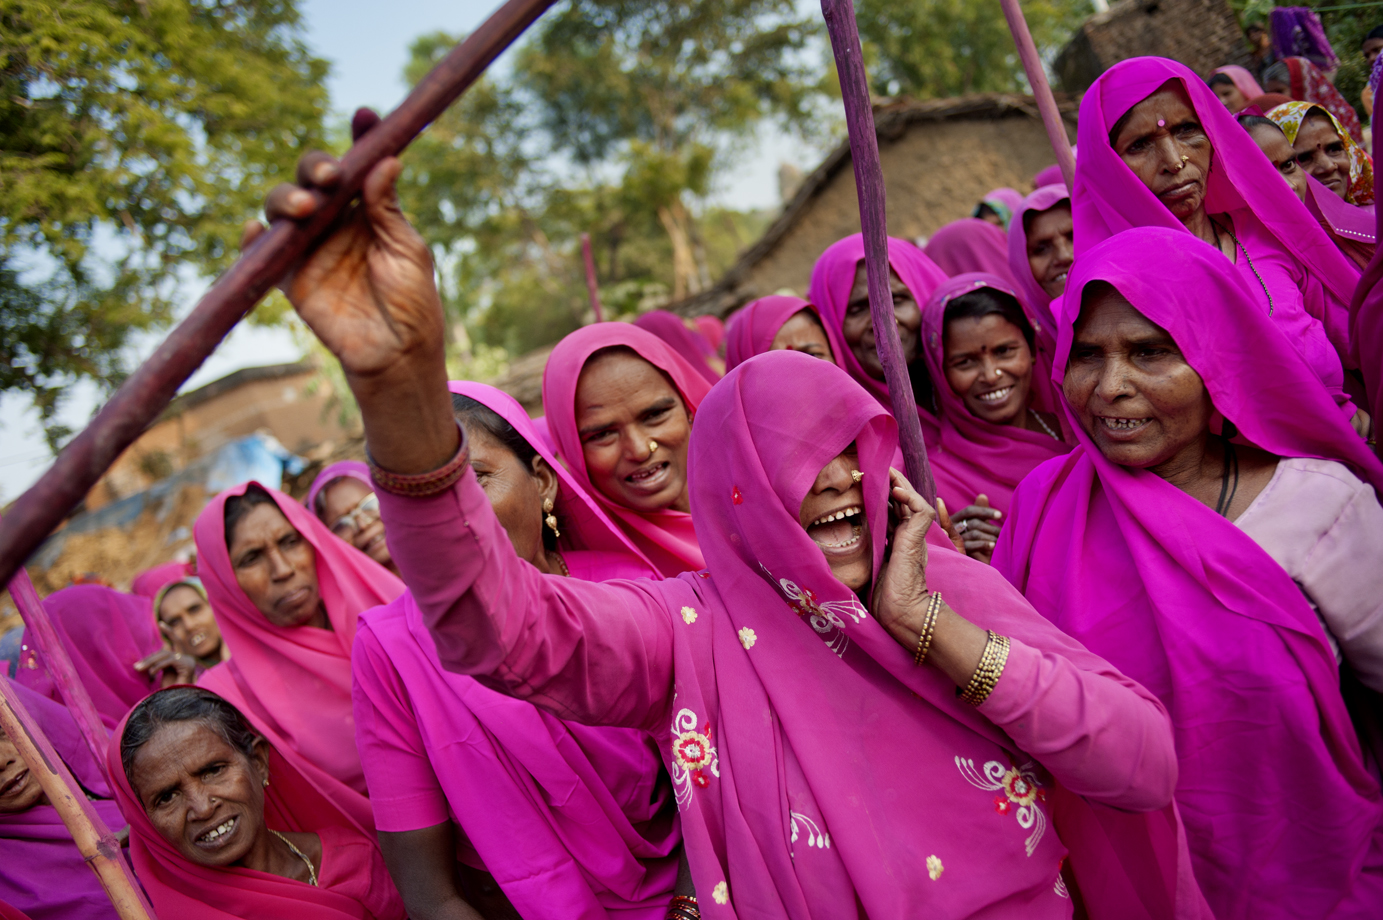  Gulabi gang, a response to widespread domestic abuse and other violence against women, Uttar Pradesh / India - 2011 